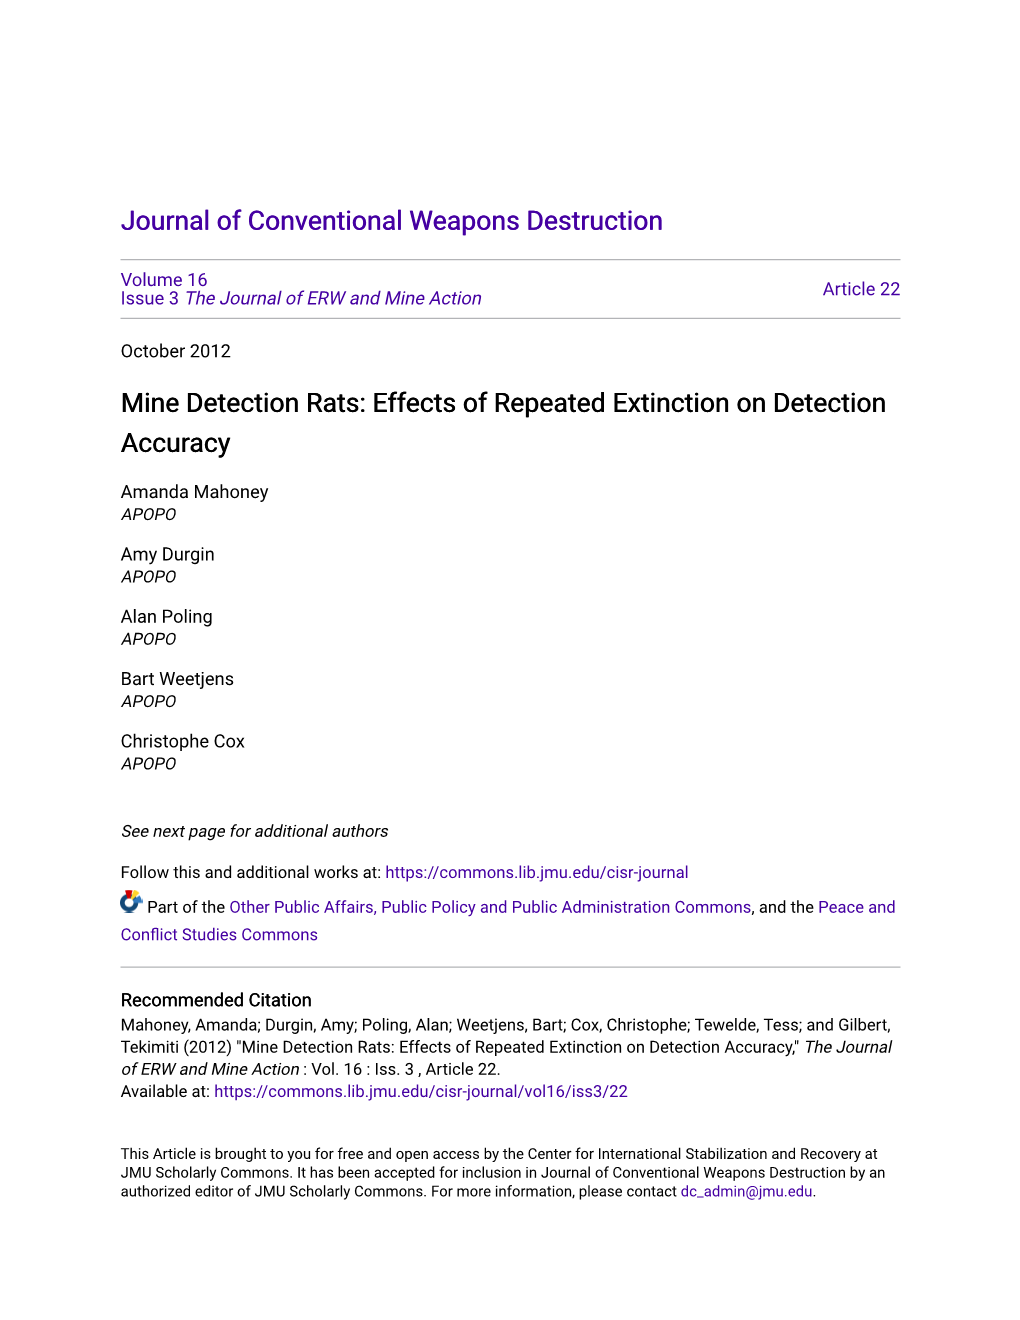 Mine Detection Rats: Effects of Repeated Extinction on Detection Accuracy